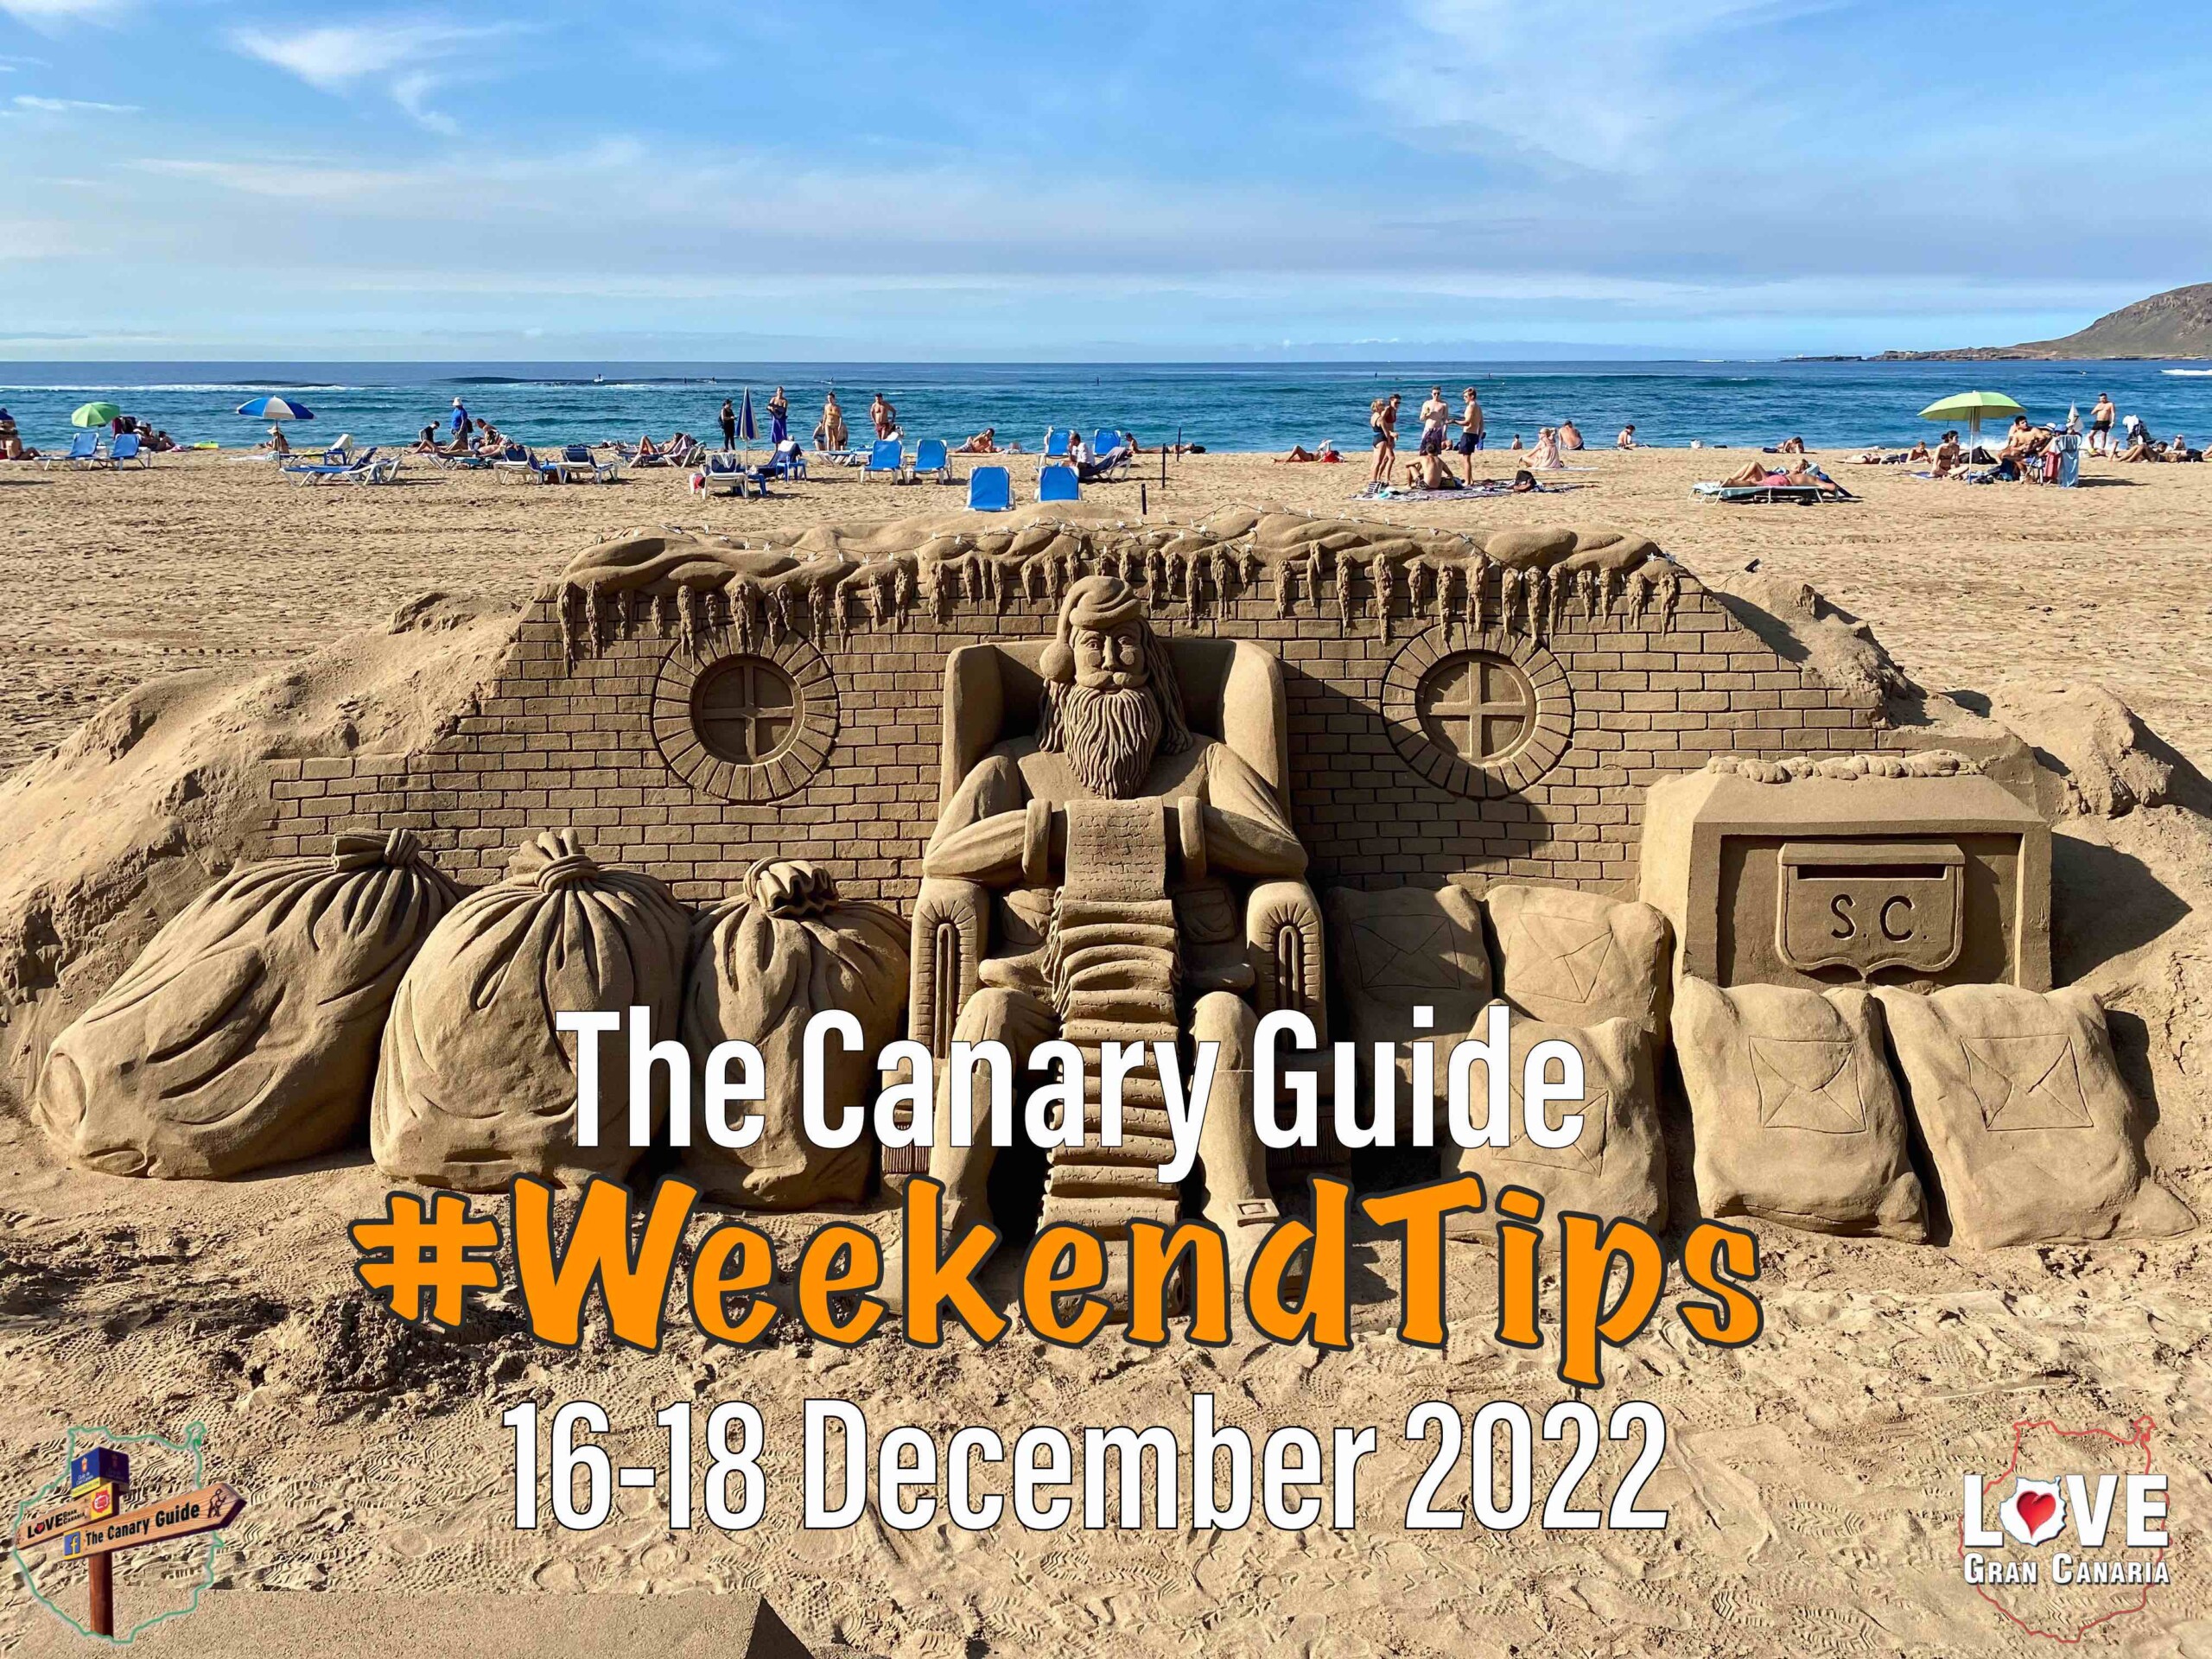 The Canary Guide #WeekendTips 16-18 December 2022